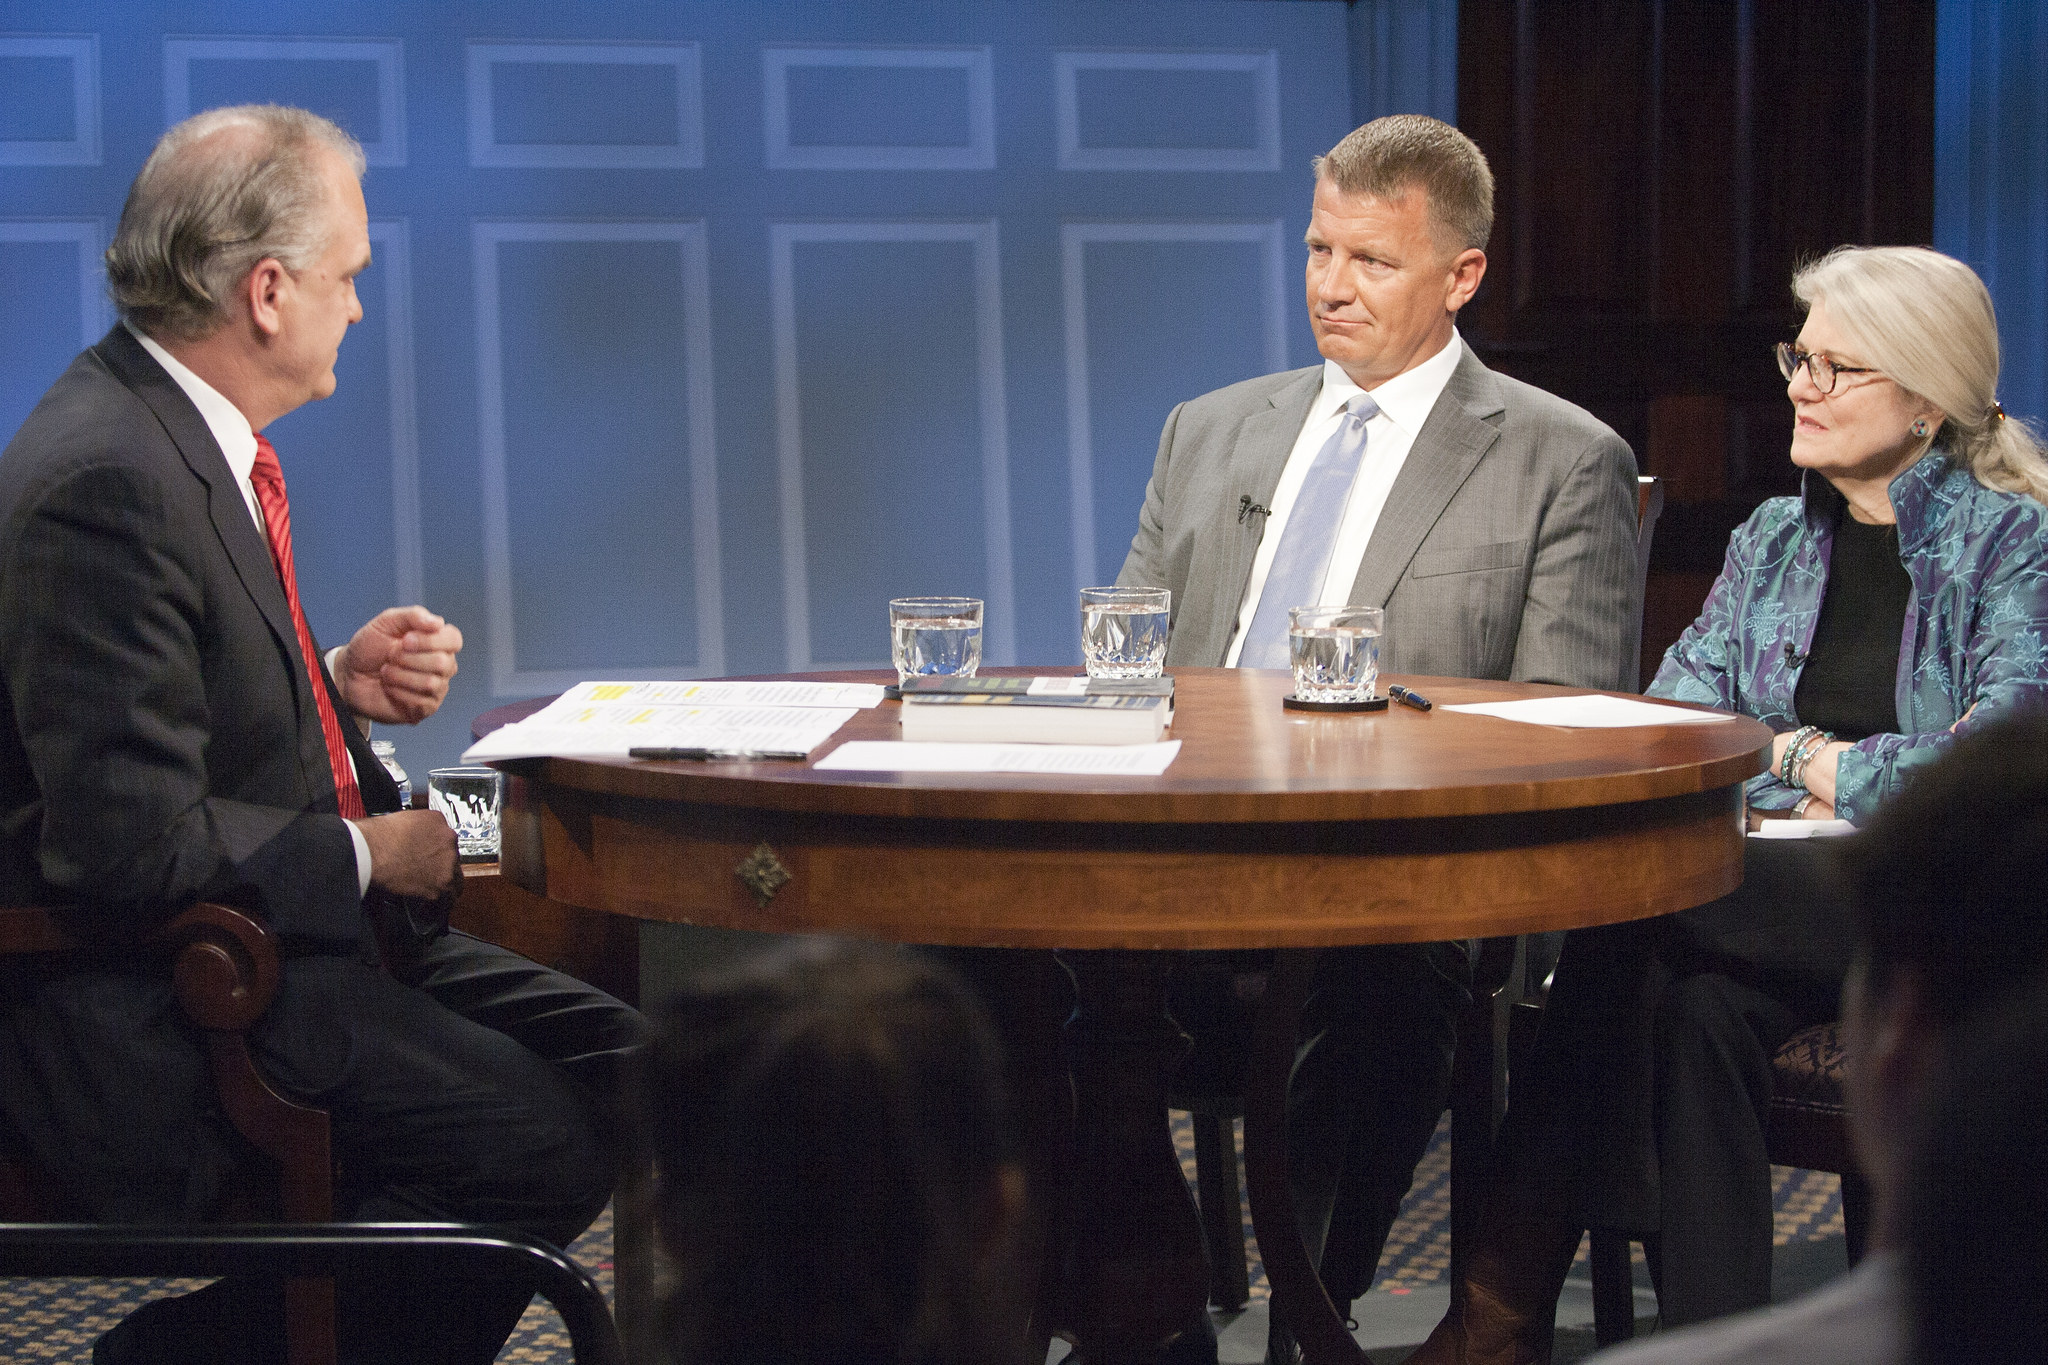 Erik Prince (center) in April 2015. Image courtesy of the Miller Center at the University of Virginia.